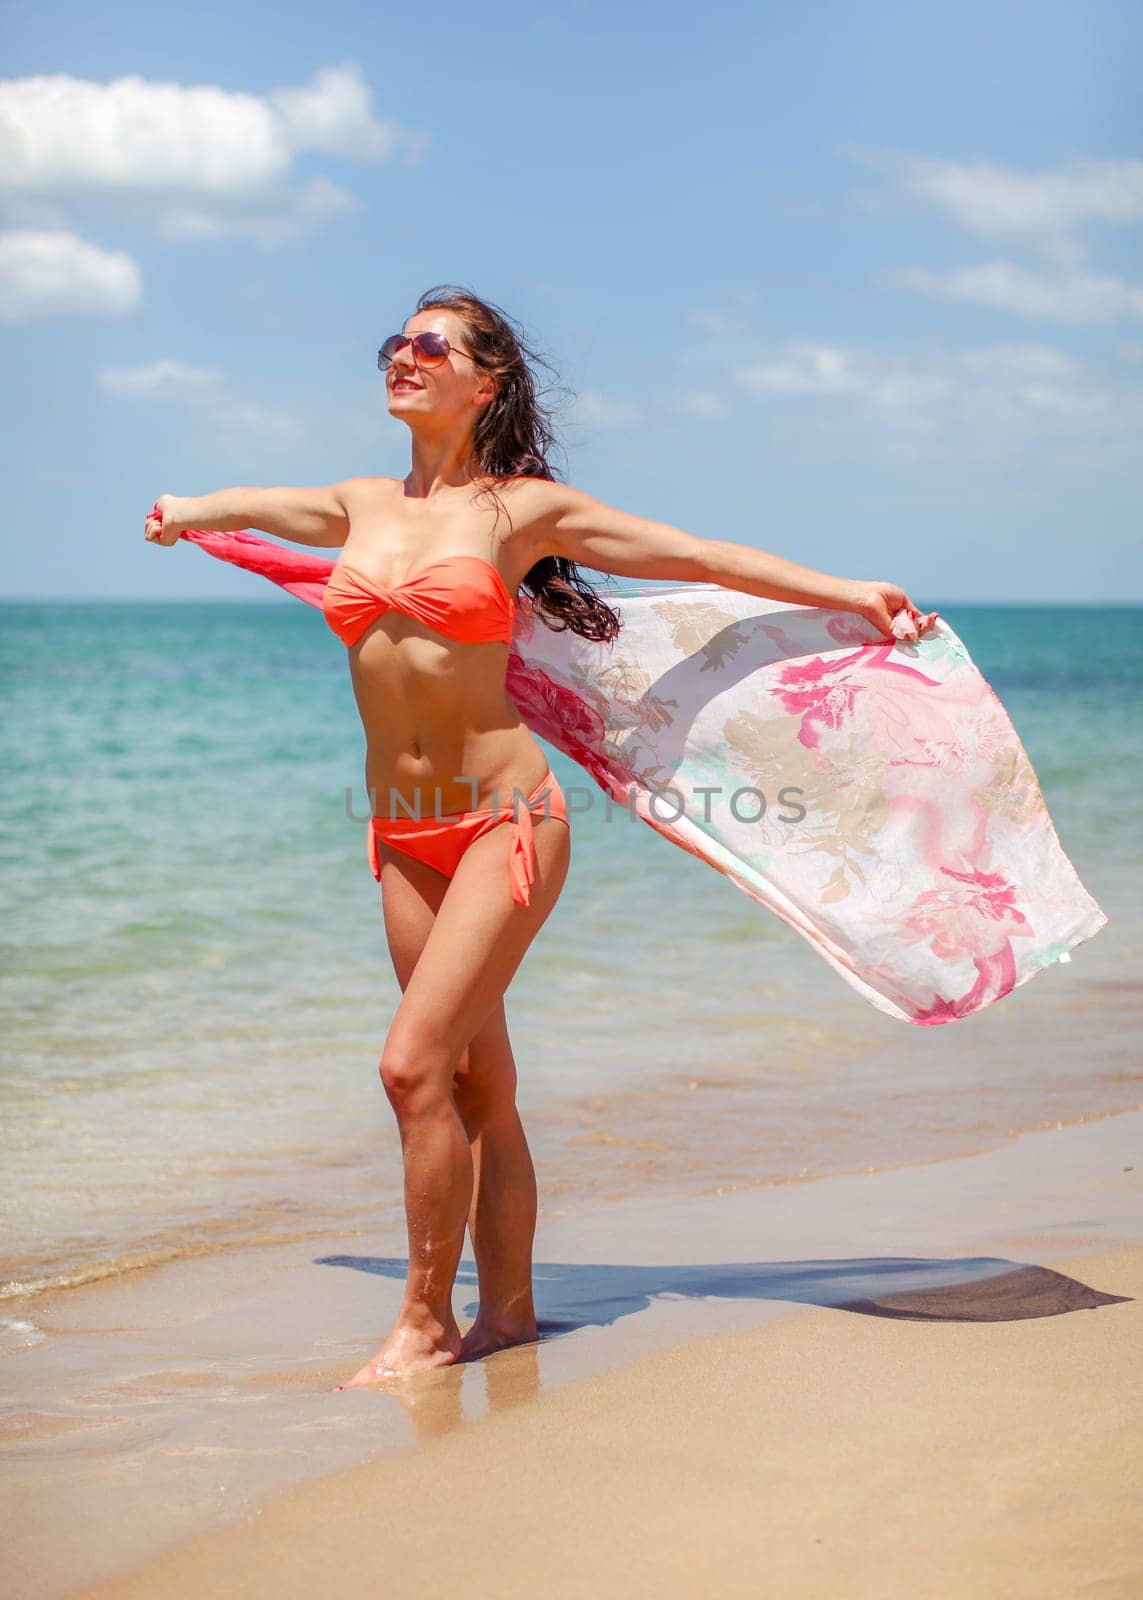 Young woman wearing orange red bikini and sunglasses standing on the beach waving silk scarf in wind behind her, sea background. by Ivanko